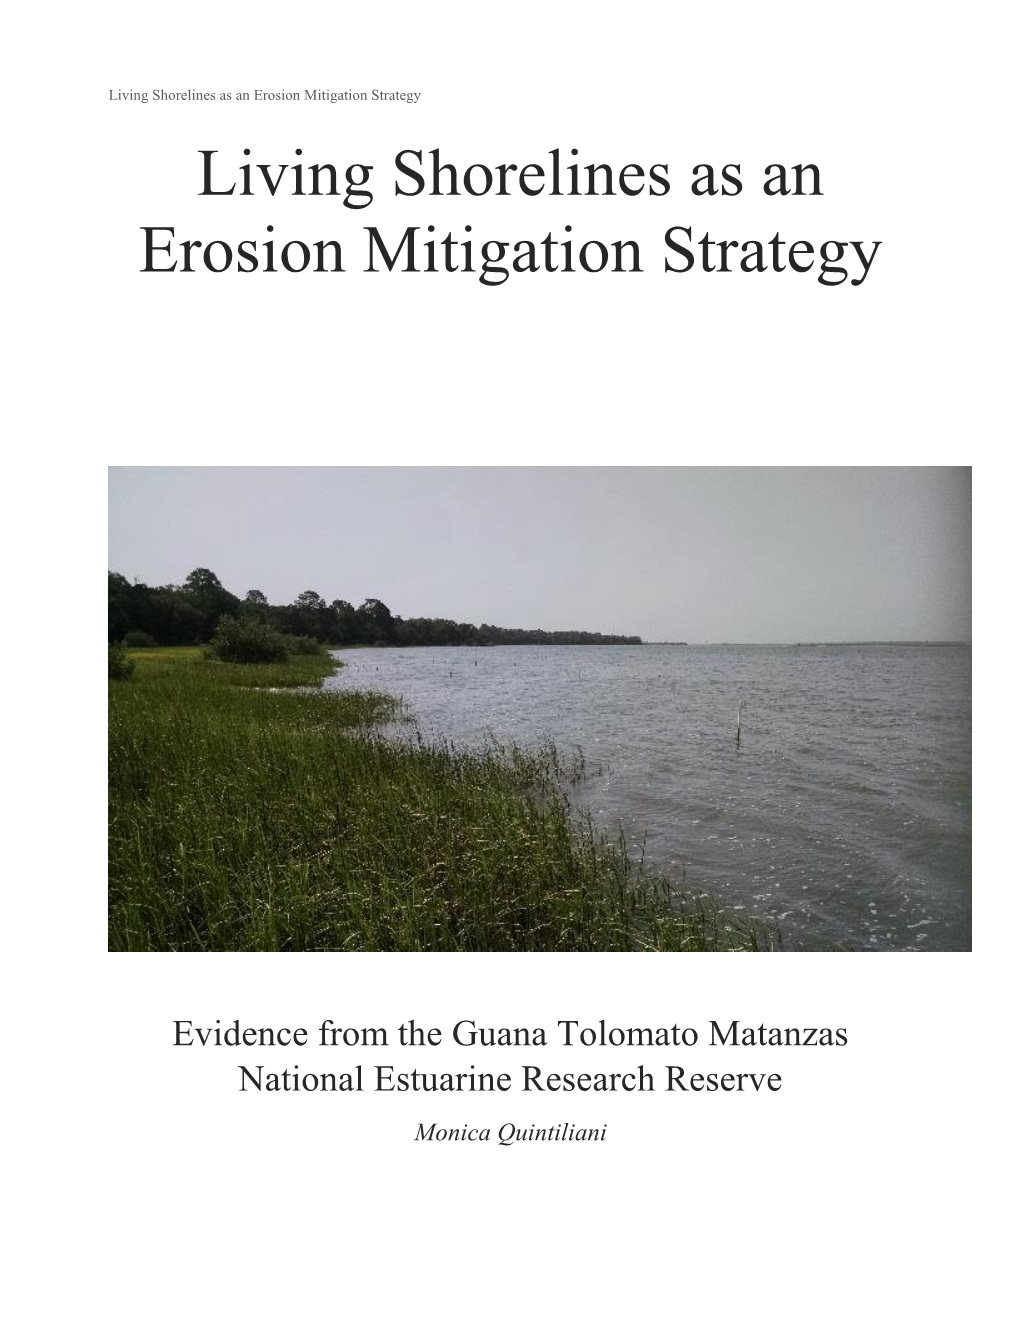 Living Shorelines As an Erosion Mitigation Strategy